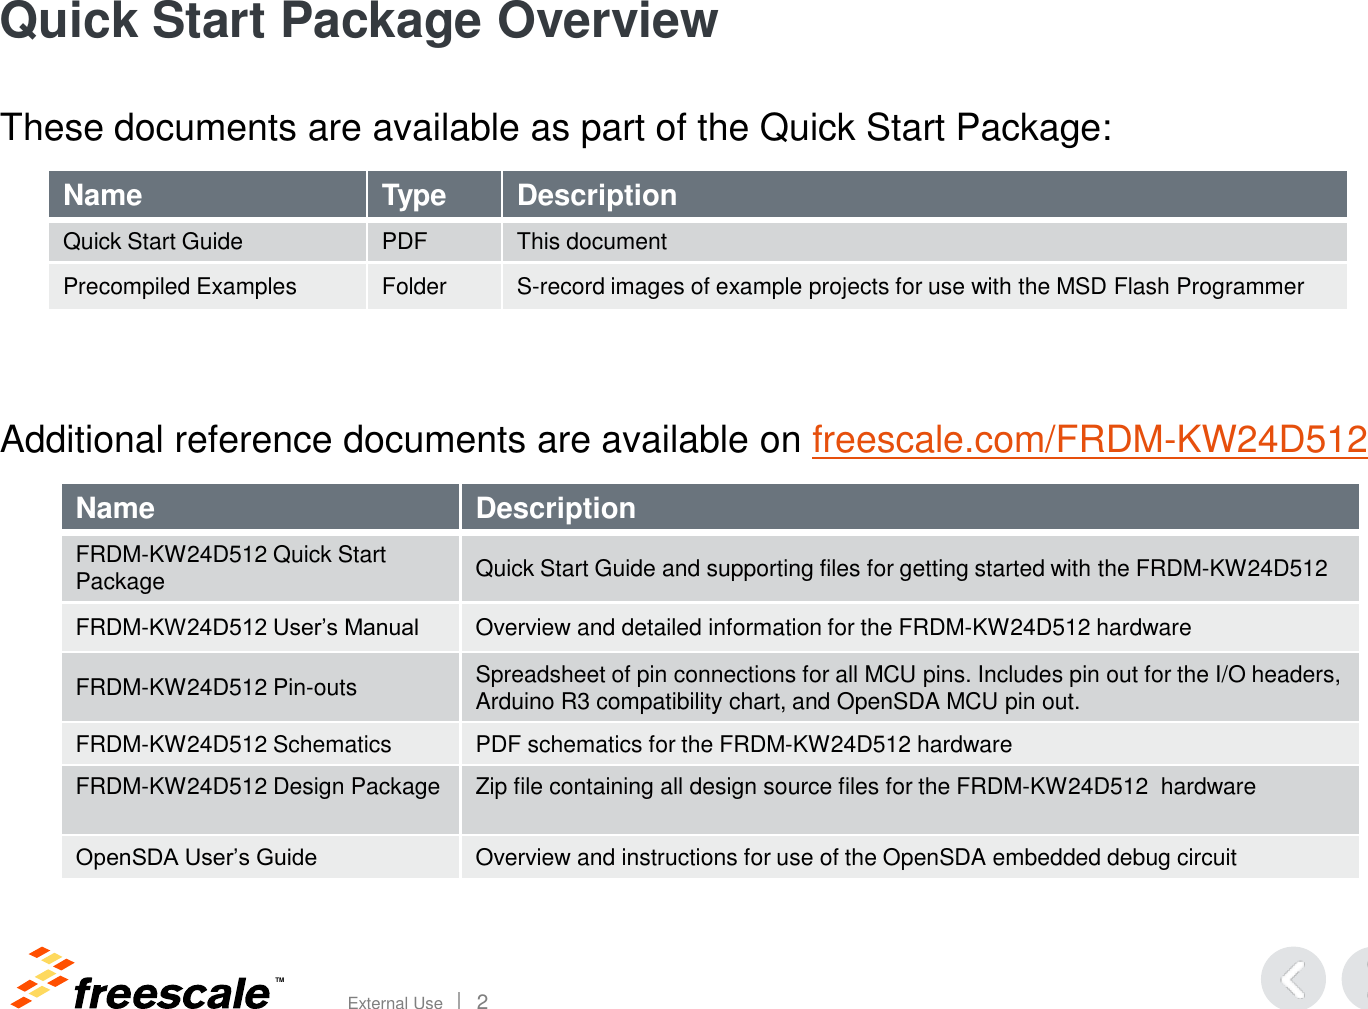 TM External Use       2 Quick Start Package Overview These documents are available as part of the Quick Start Package:      Additional reference documents are available on freescale.com/FRDM-KW24D512  Name Type Description Quick Start Guide  PDF  This document  Precompiled Examples  Folder S-record images of example projects for use with the MSD Flash Programmer  Name Description FRDM-KW24D512 Quick Start Package Quick Start Guide and supporting files for getting started with the FRDM-KW24D512 FRDM-KW24D512 User’s Manual Overview and detailed information for the FRDM-KW24D512 hardware FRDM-KW24D512 Pin-outs    Spreadsheet of pin connections for all MCU pins. Includes pin out for the I/O headers, Arduino R3 compatibility chart, and OpenSDA MCU pin out. FRDM-KW24D512 Schematics  PDF schematics for the FRDM-KW24D512 hardware  FRDM-KW24D512 Design Package    Zip file containing all design source files for the FRDM-KW24D512  hardware    OpenSDA User’s Guide Overview and instructions for use of the OpenSDA embedded debug circuit 